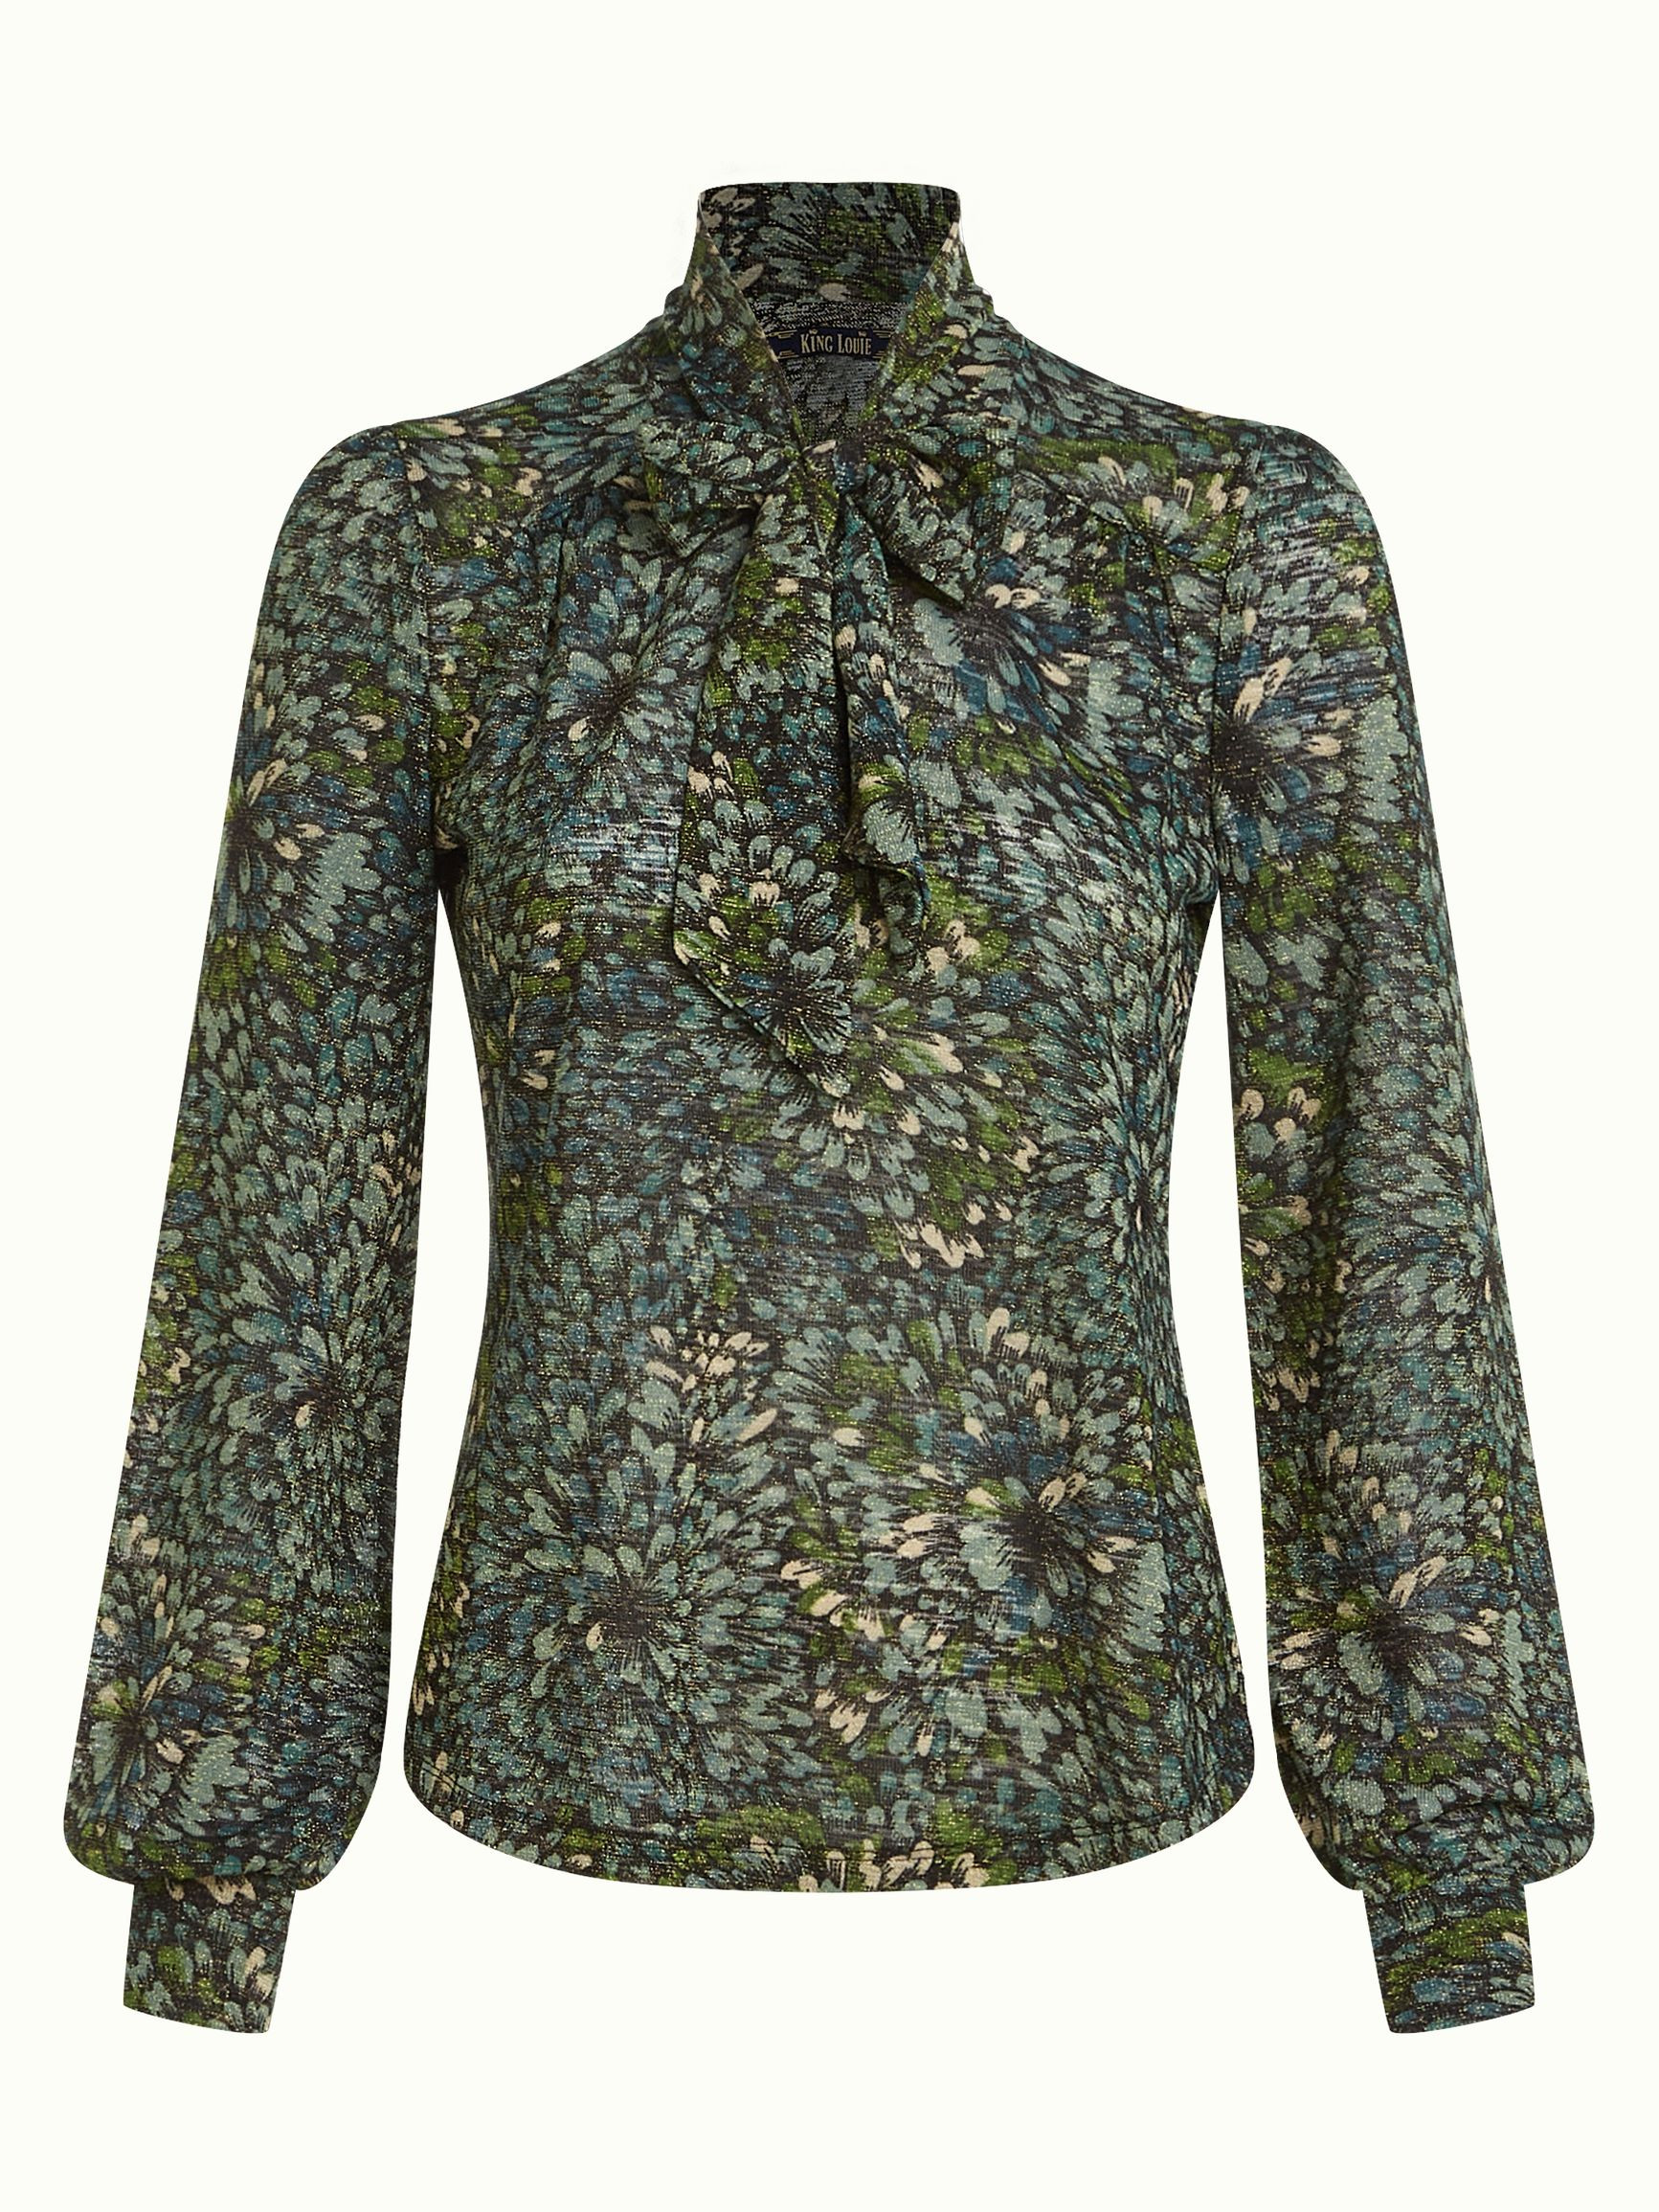 King Louie Amalia Top Glam, Farbe: Dragonfly Green